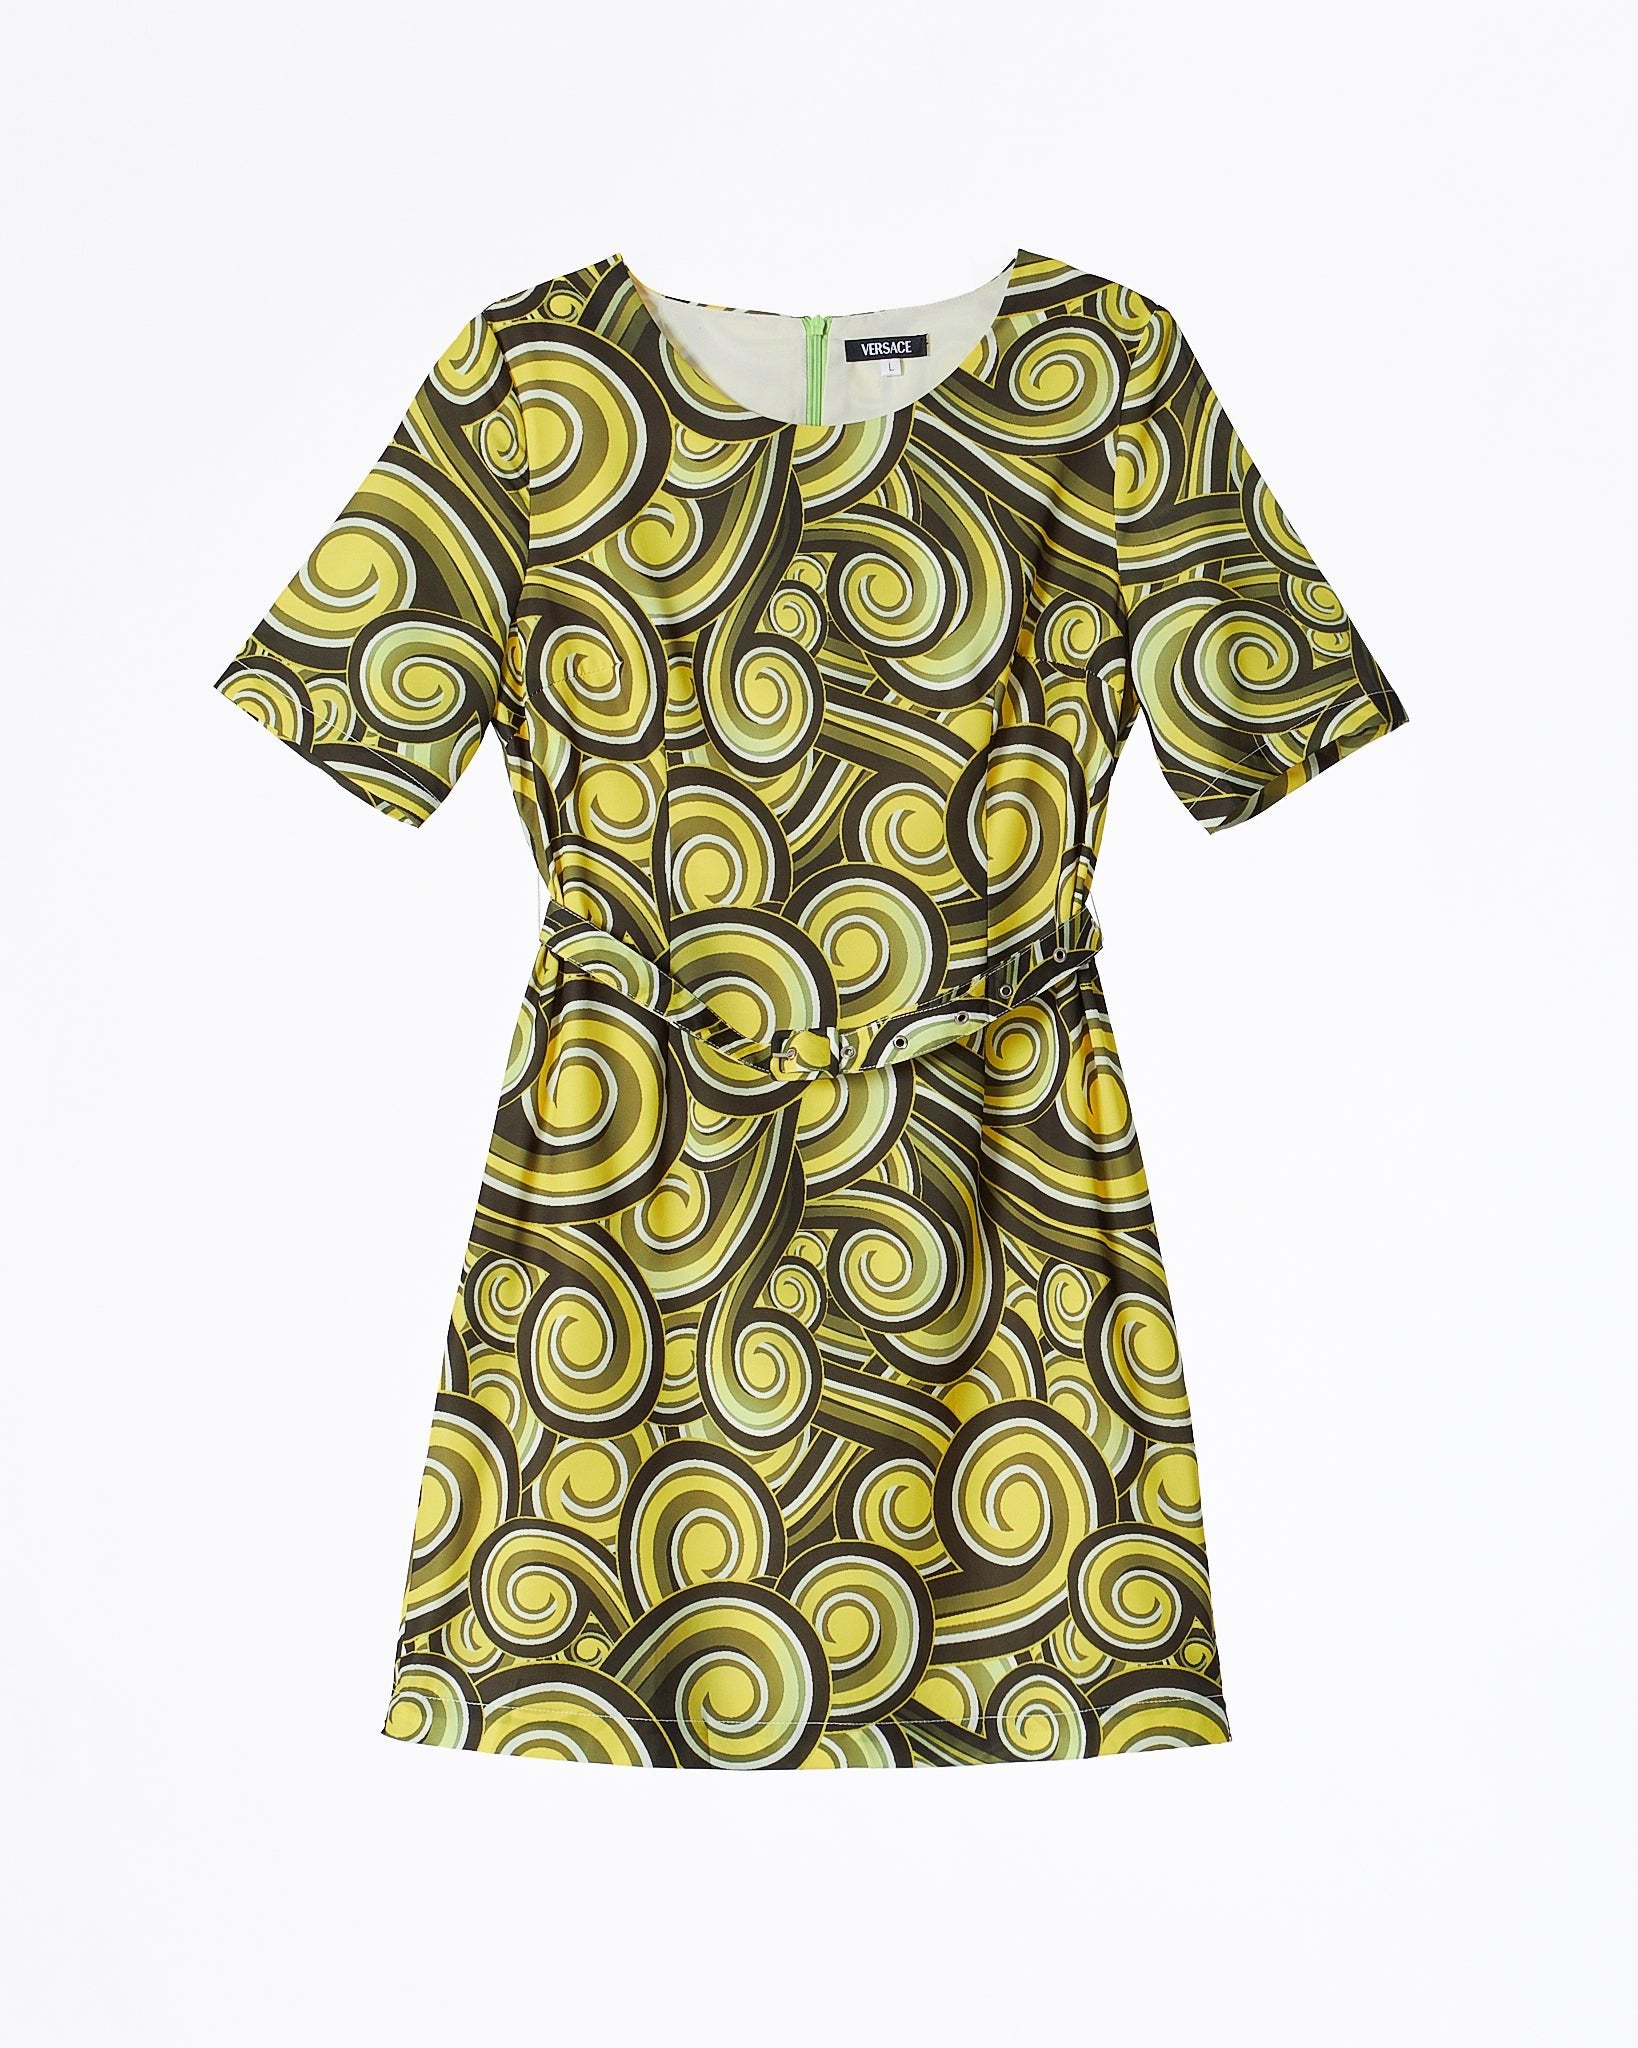 MOI OUTFIT-VS Lady Yellow Dress 89.90